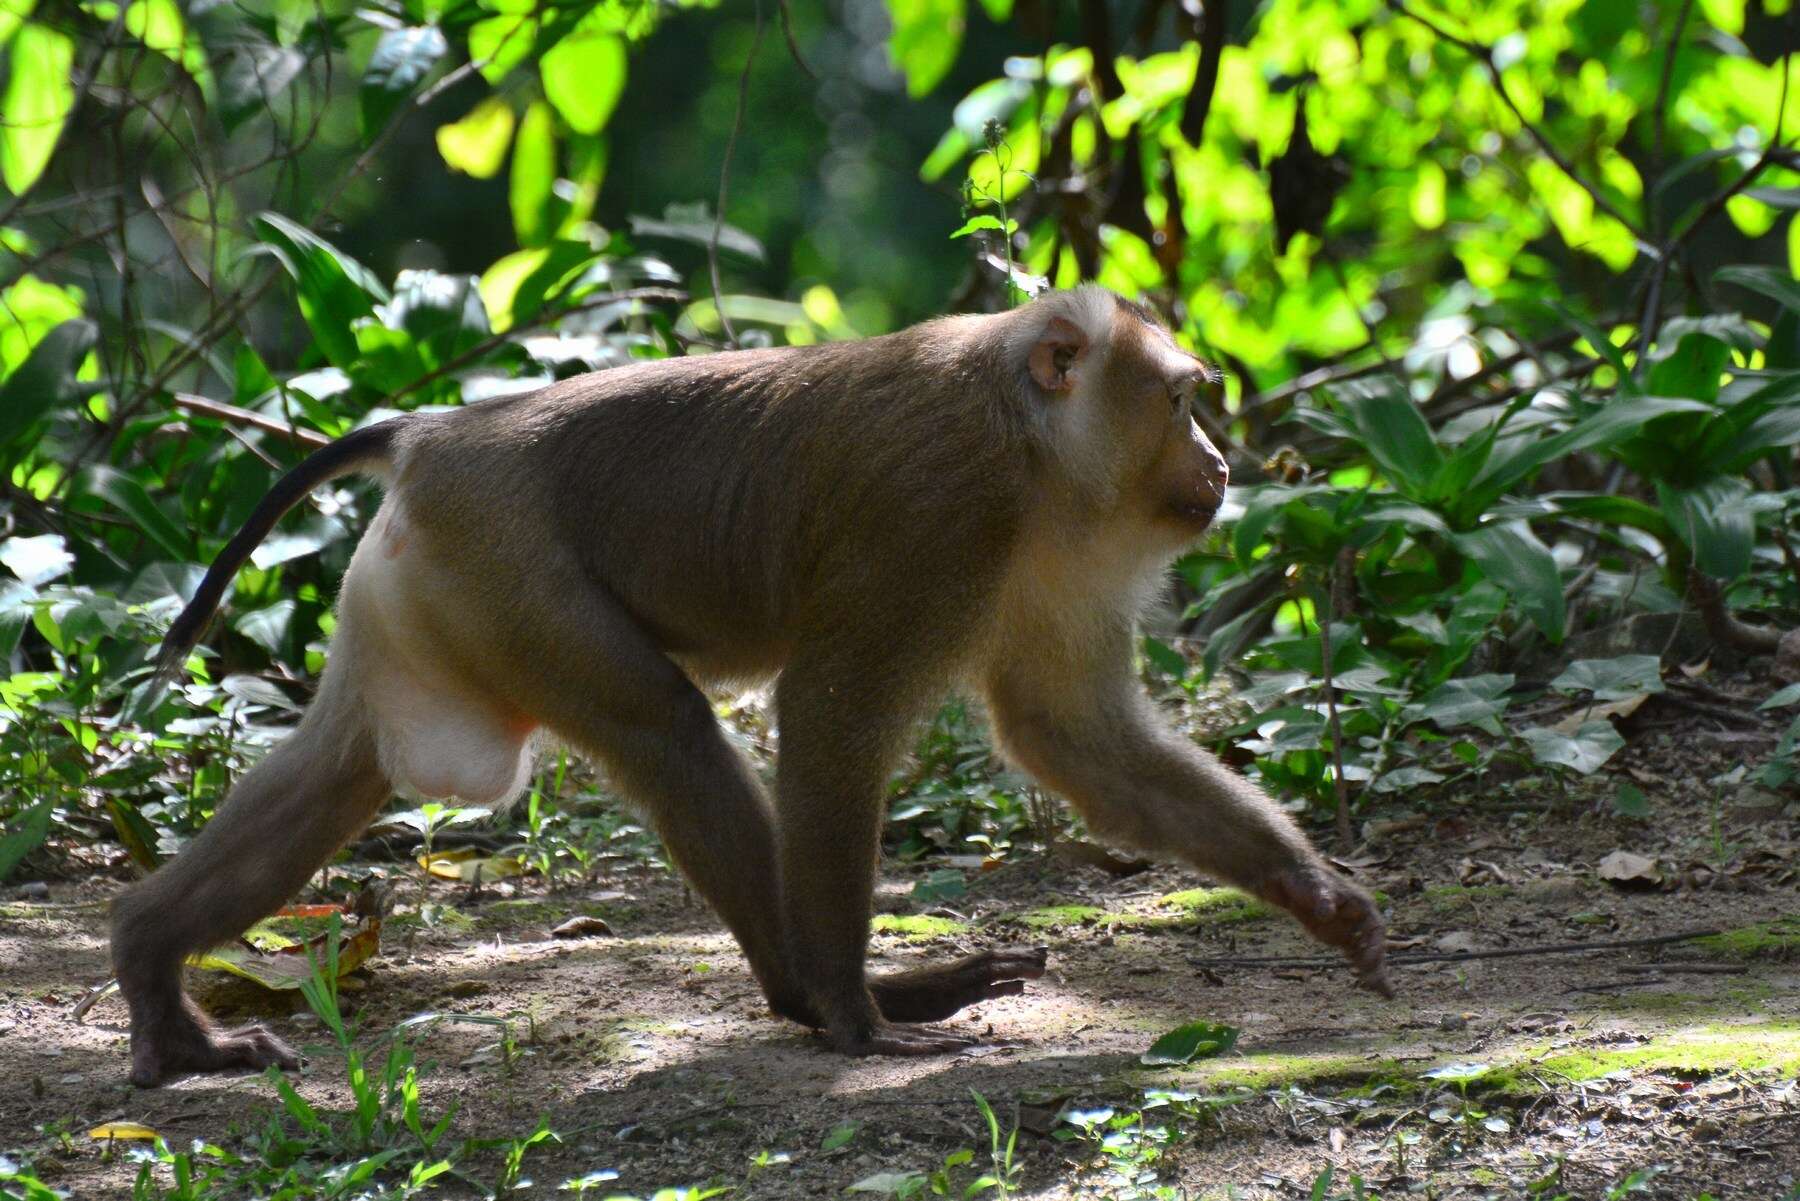 Image of Northern Pig-tailed Macaque